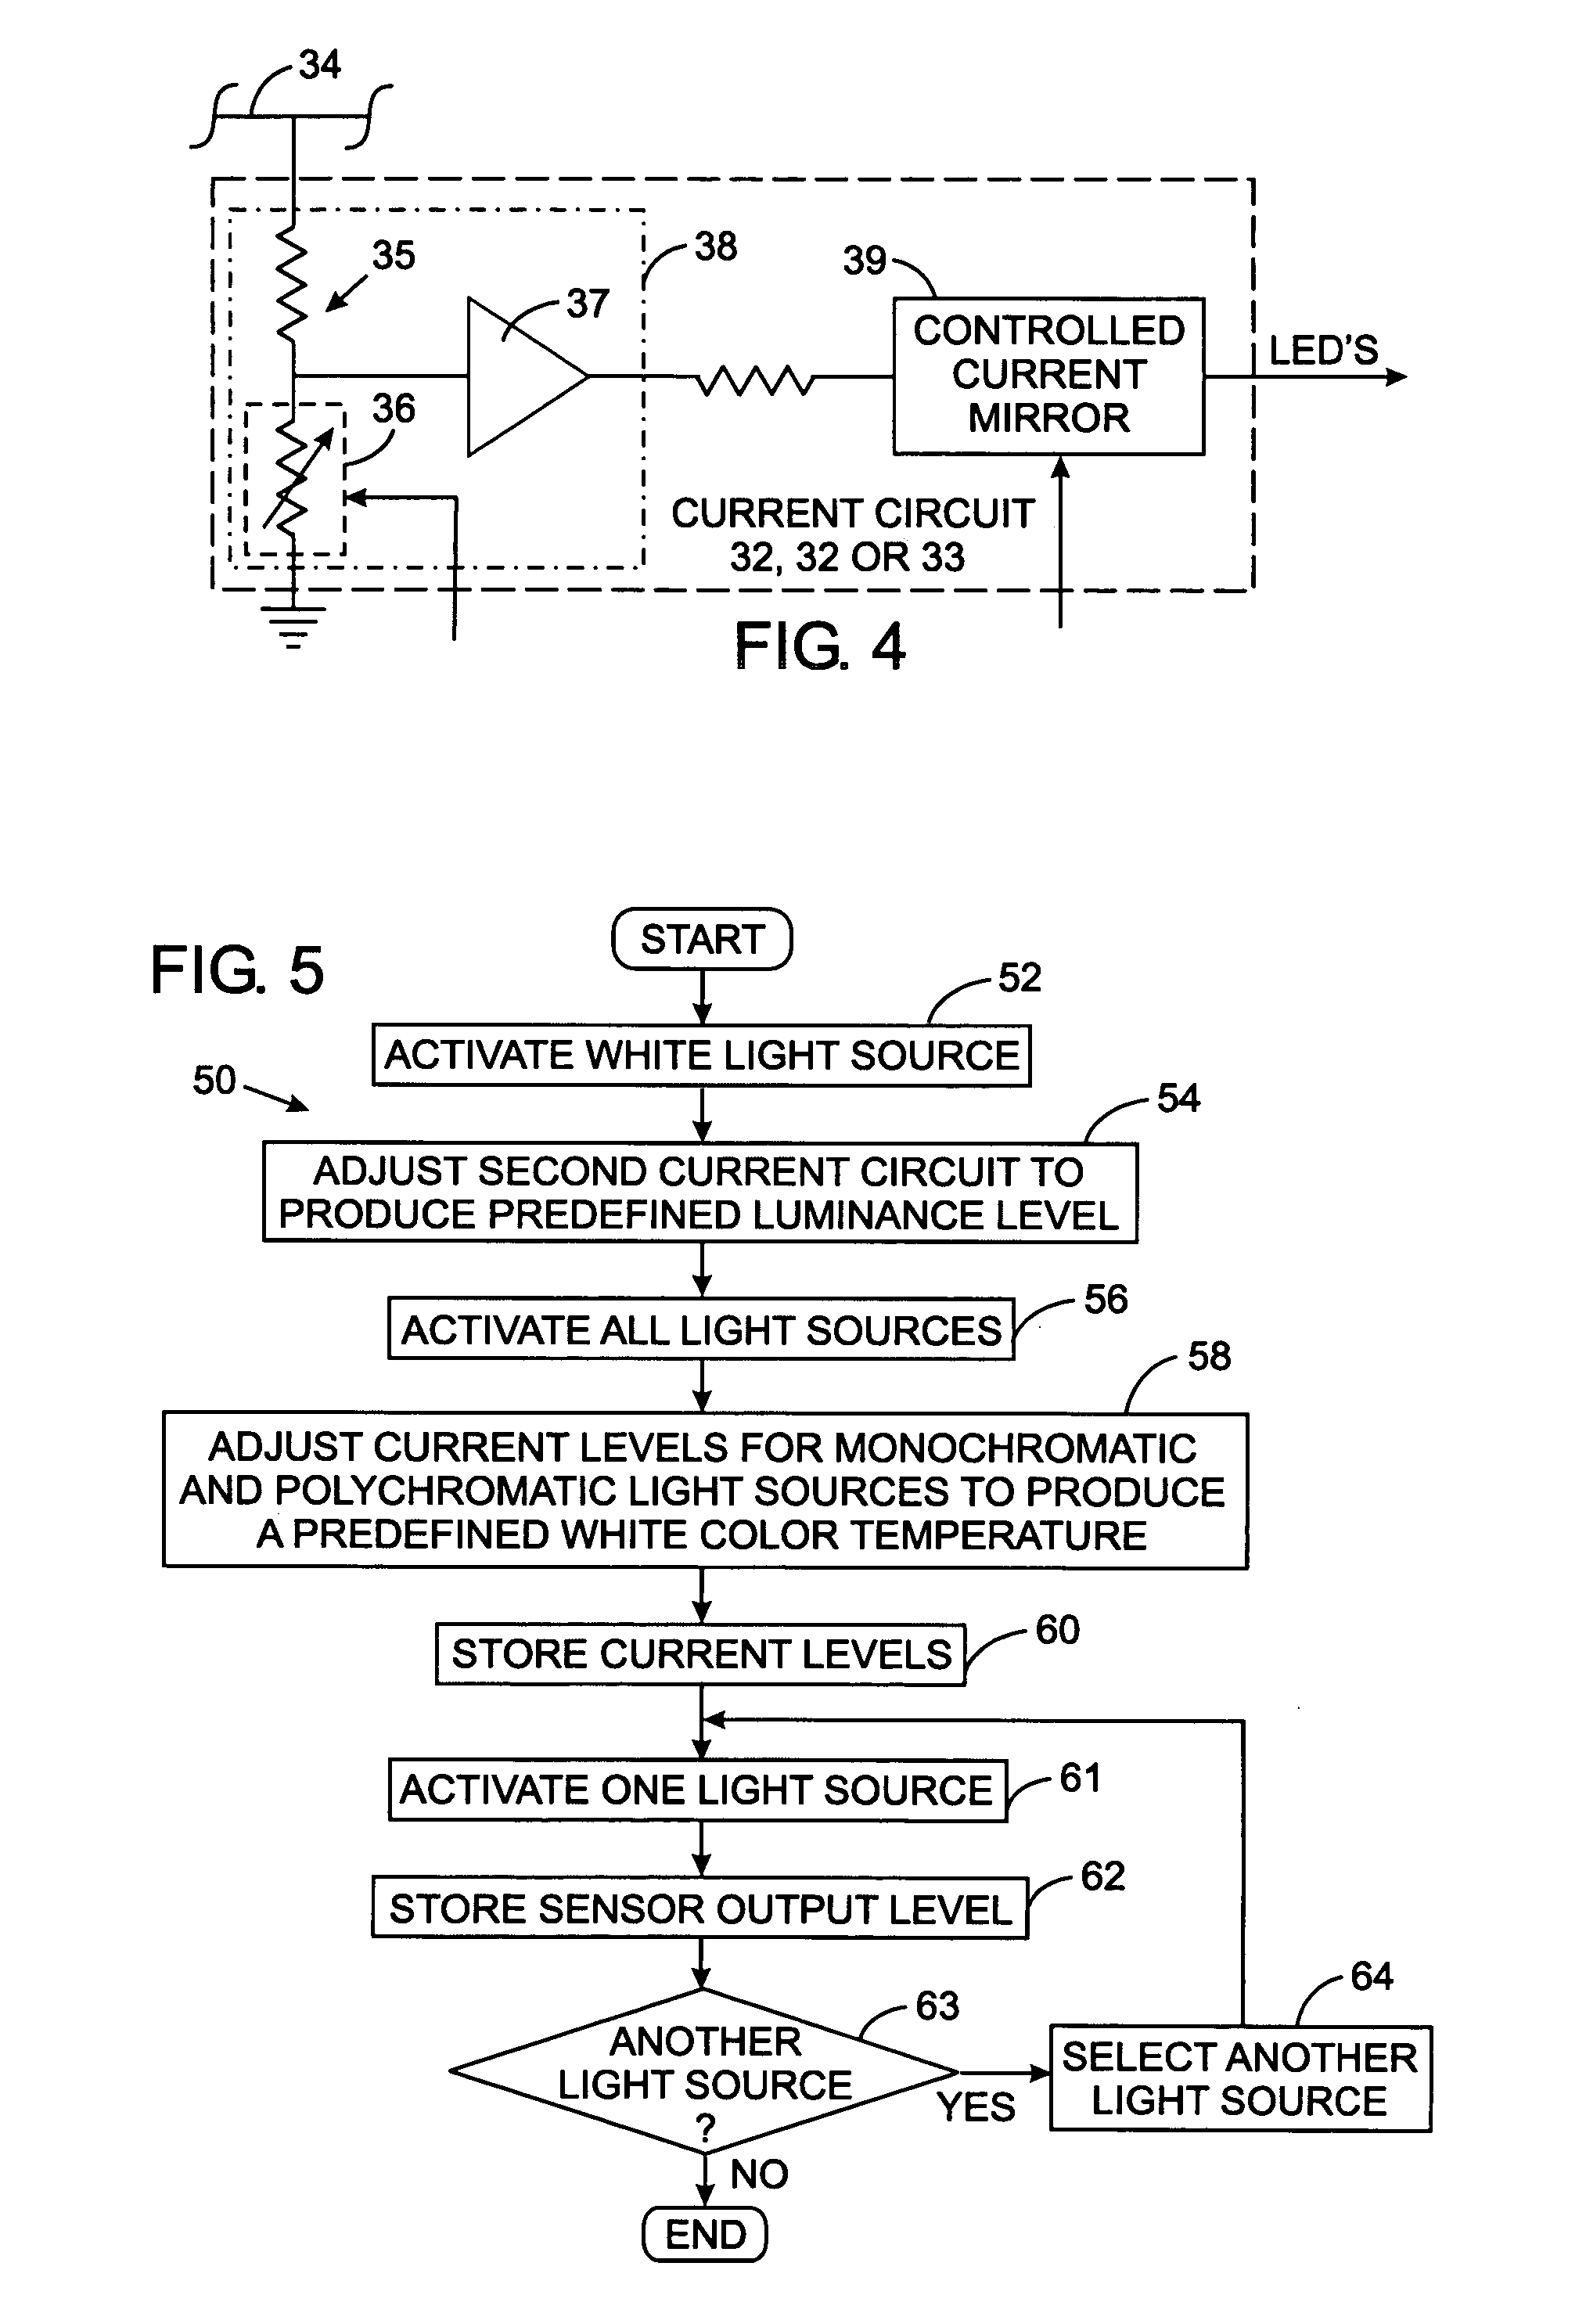 Lighting apparatus having a plurality of independently controlled sources of different colors of light